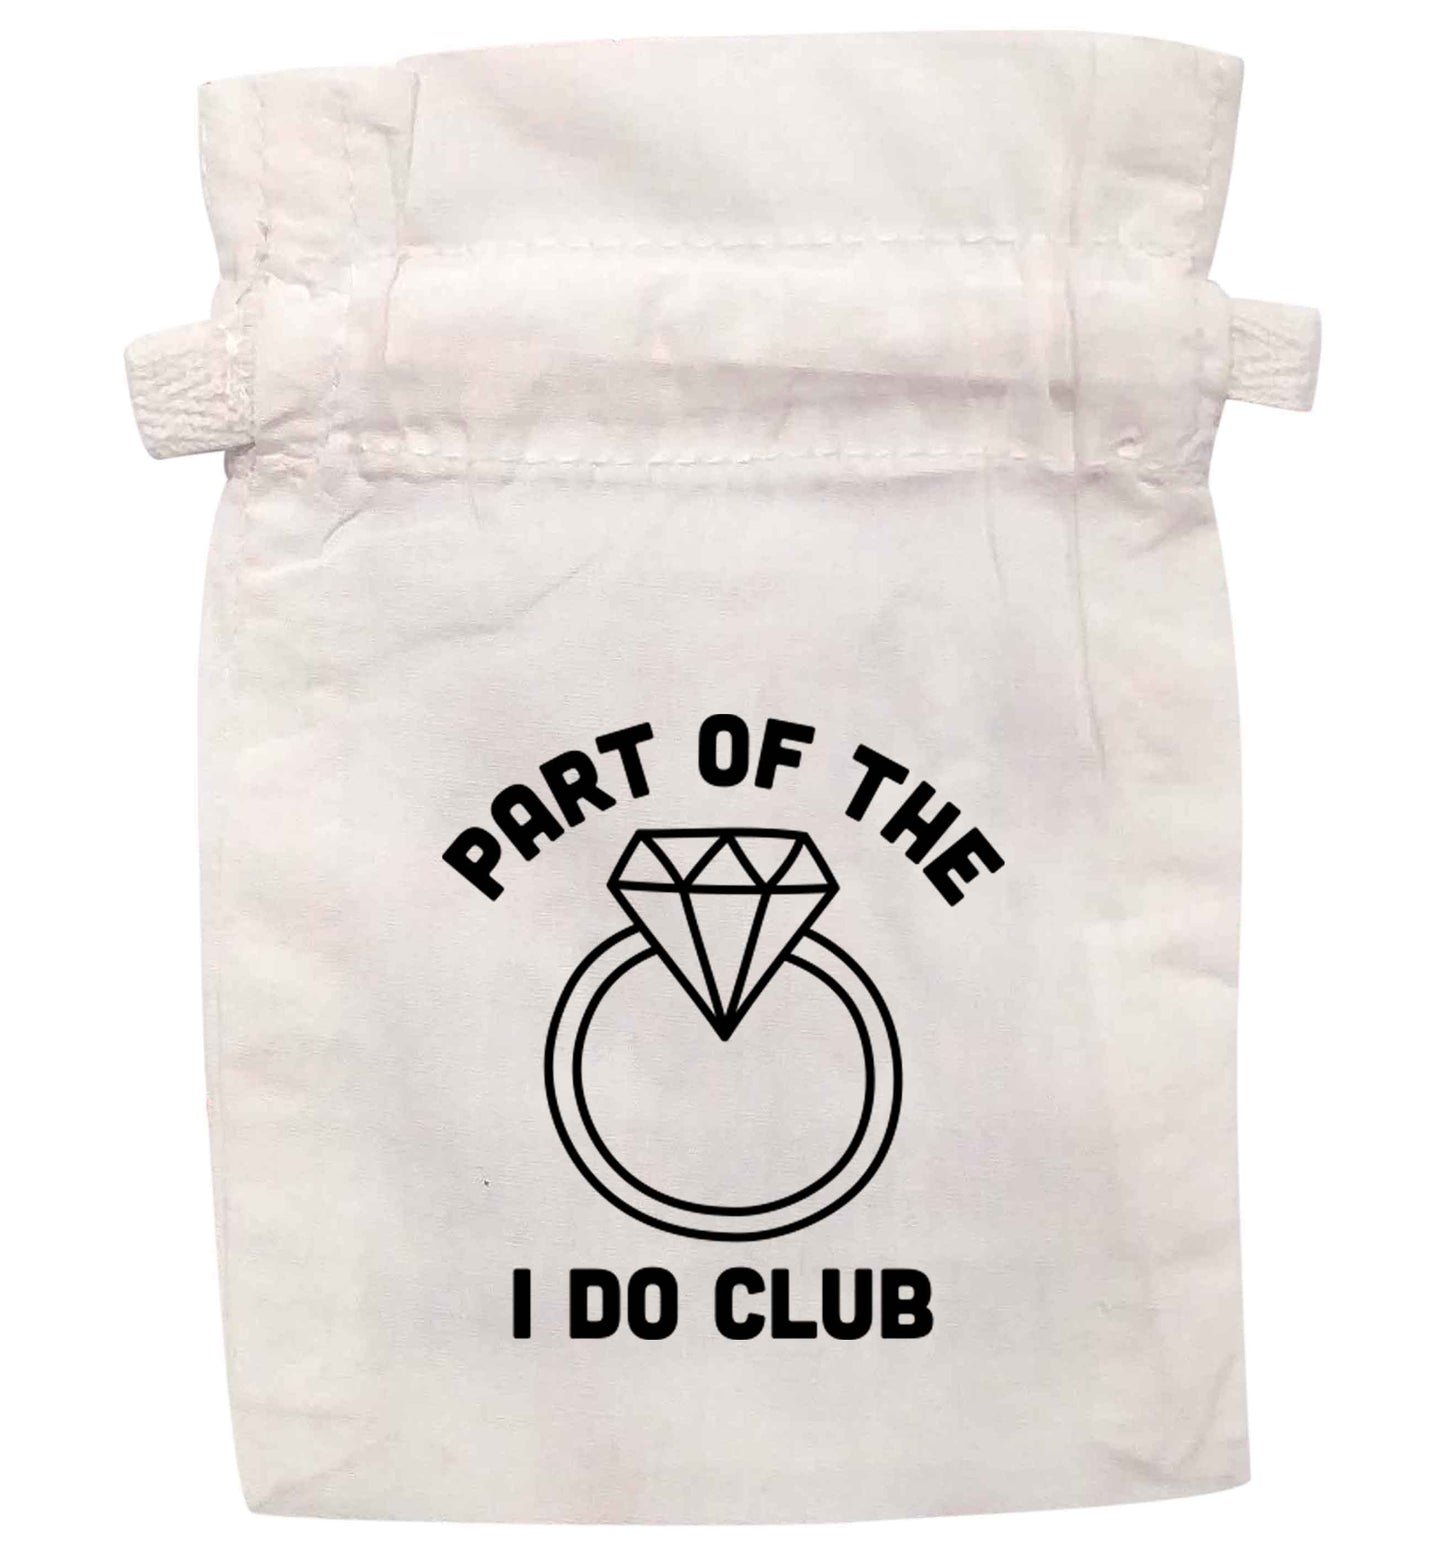 Part of the I do club | XS - L | Pouch / Drawstring bag / Sack | Organic Cotton | Bulk discounts available!